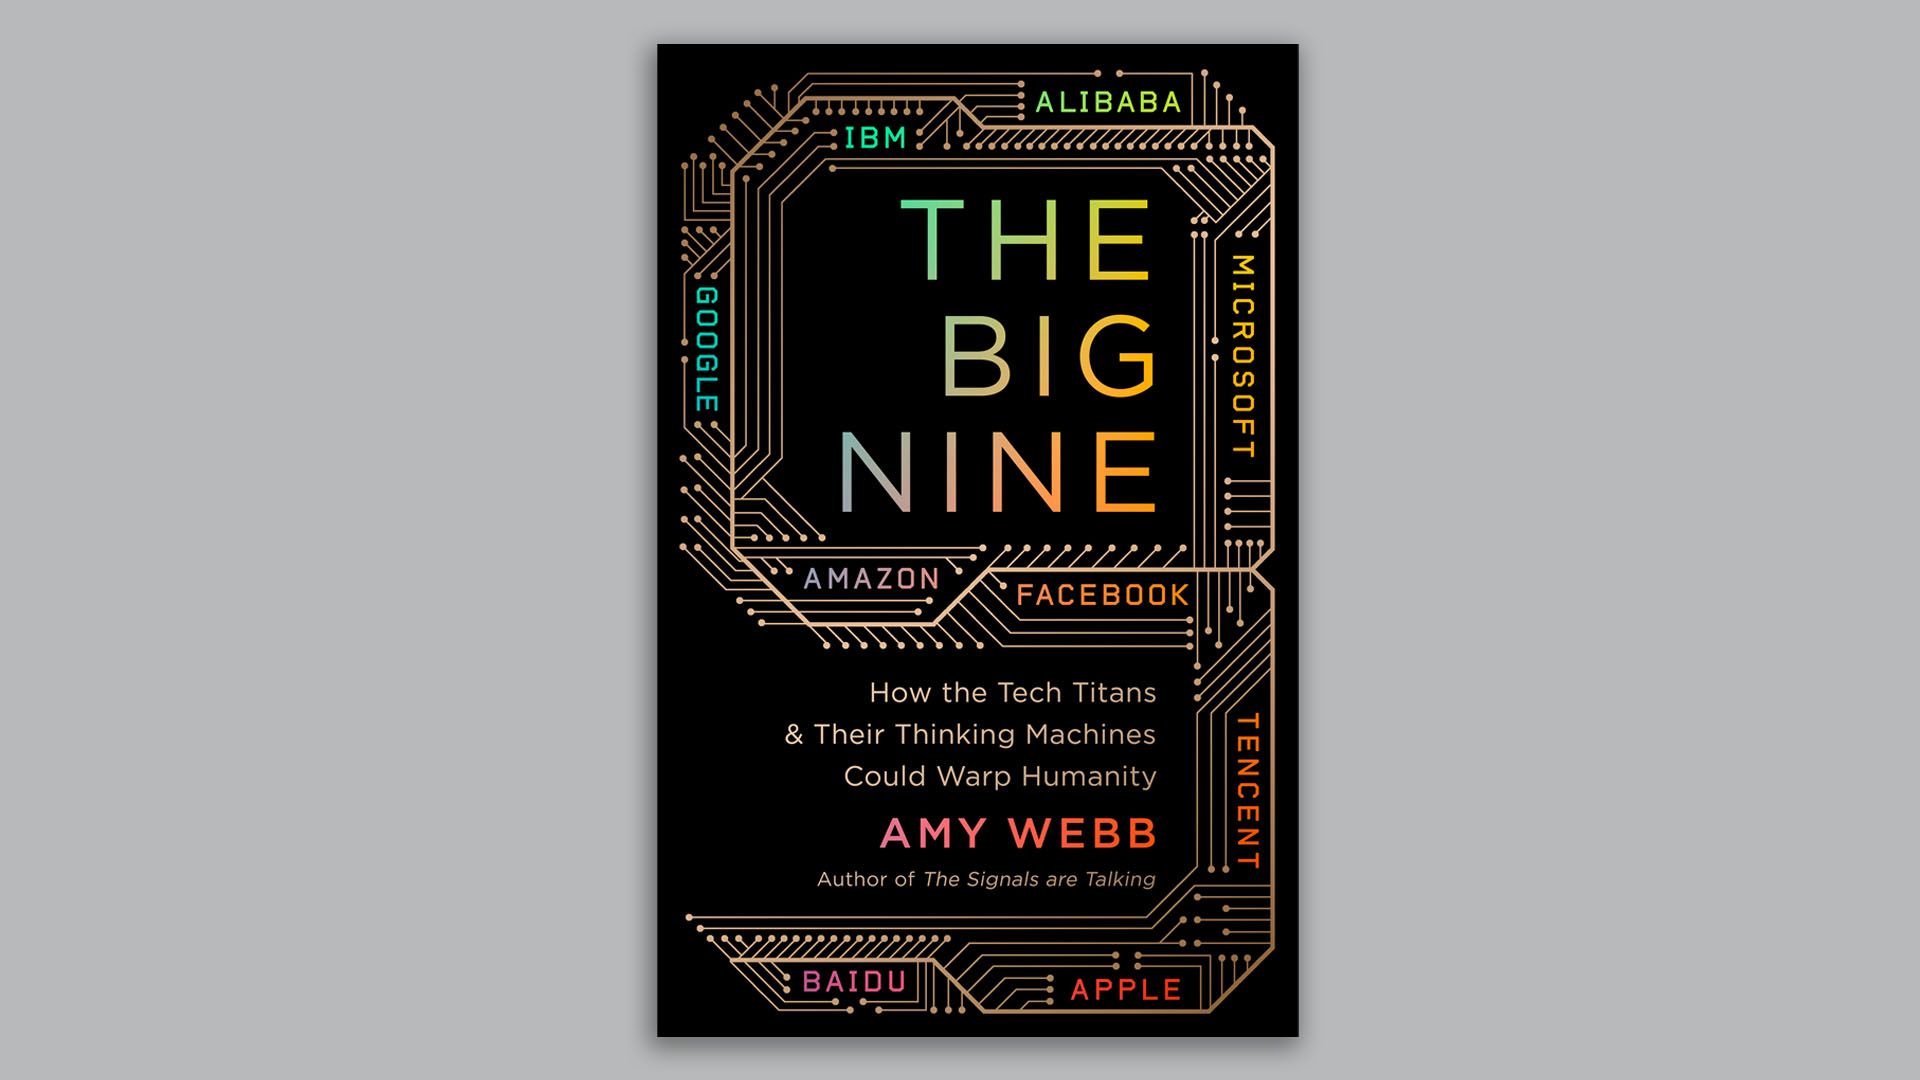 Book cover for Amy Webb's "The Big Nine"